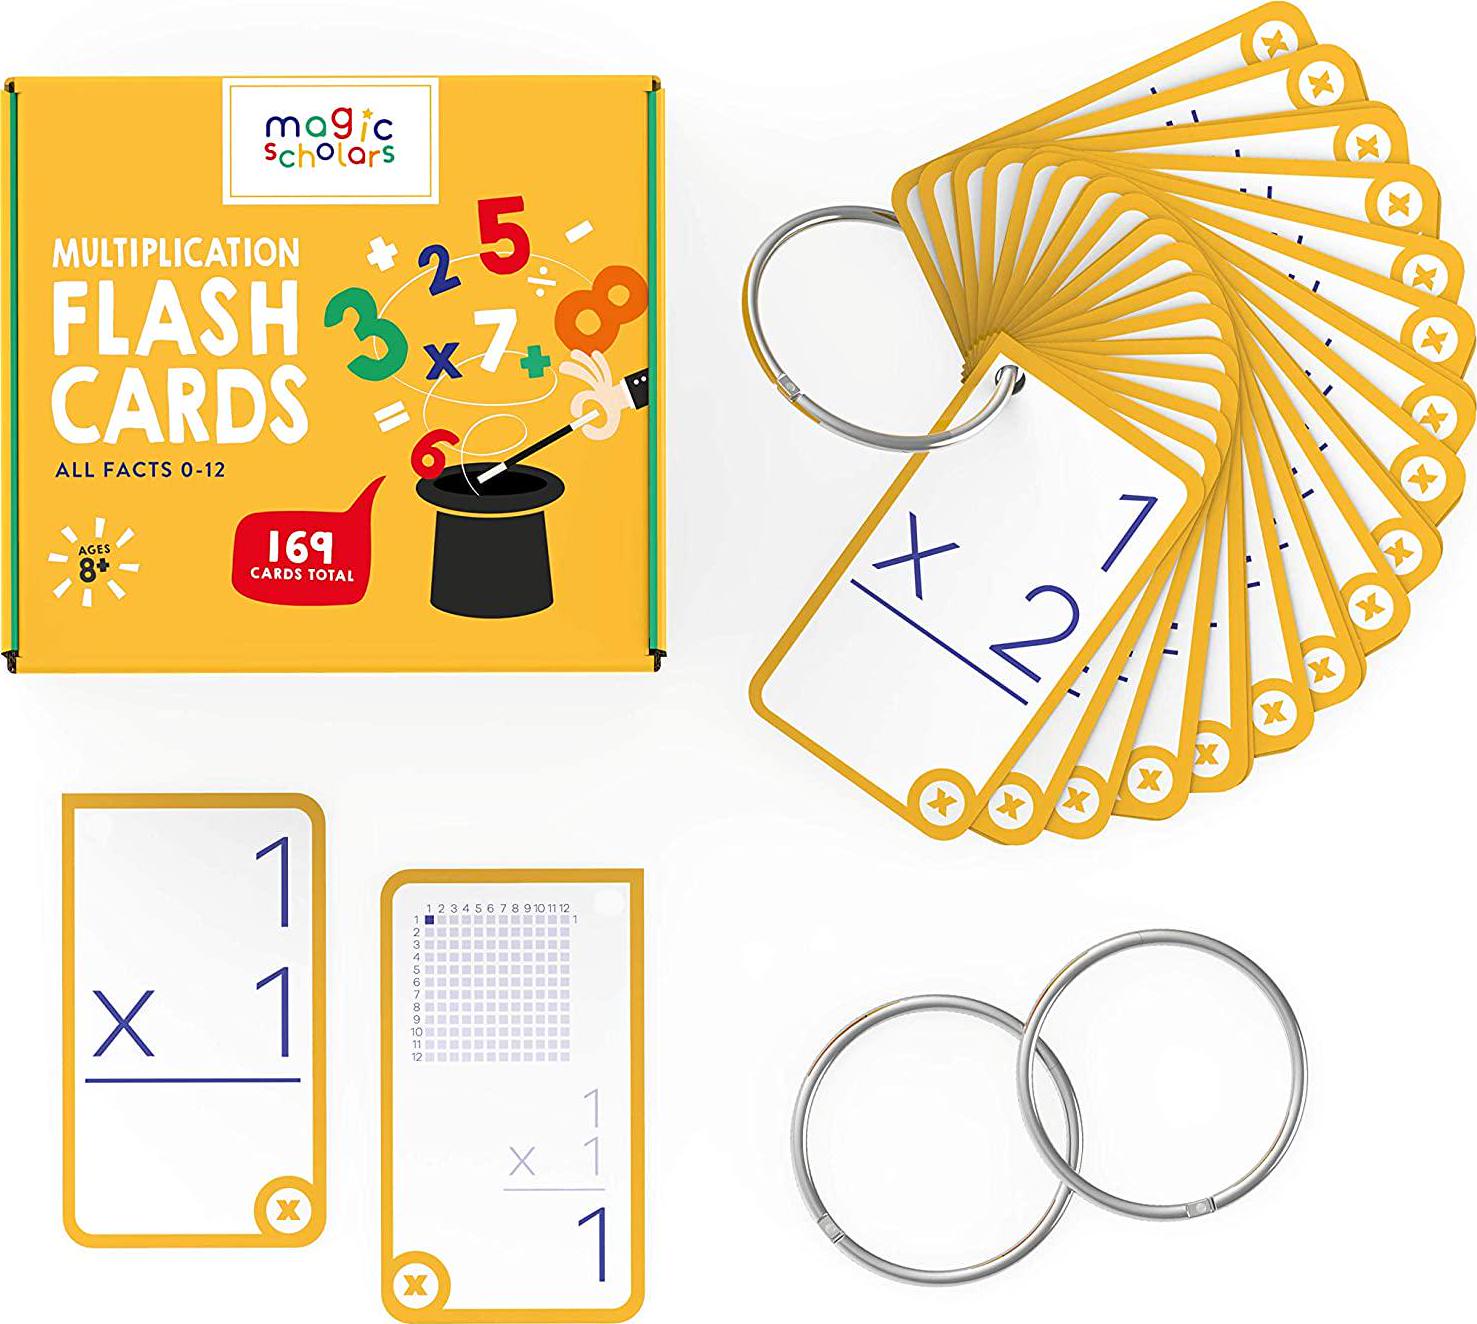 Magic Scholars, Magic Scholars Educational Multiplication Flash Cards (0-12, All Facts), 169 Cards with Two Rings (0-12 Multiplication)